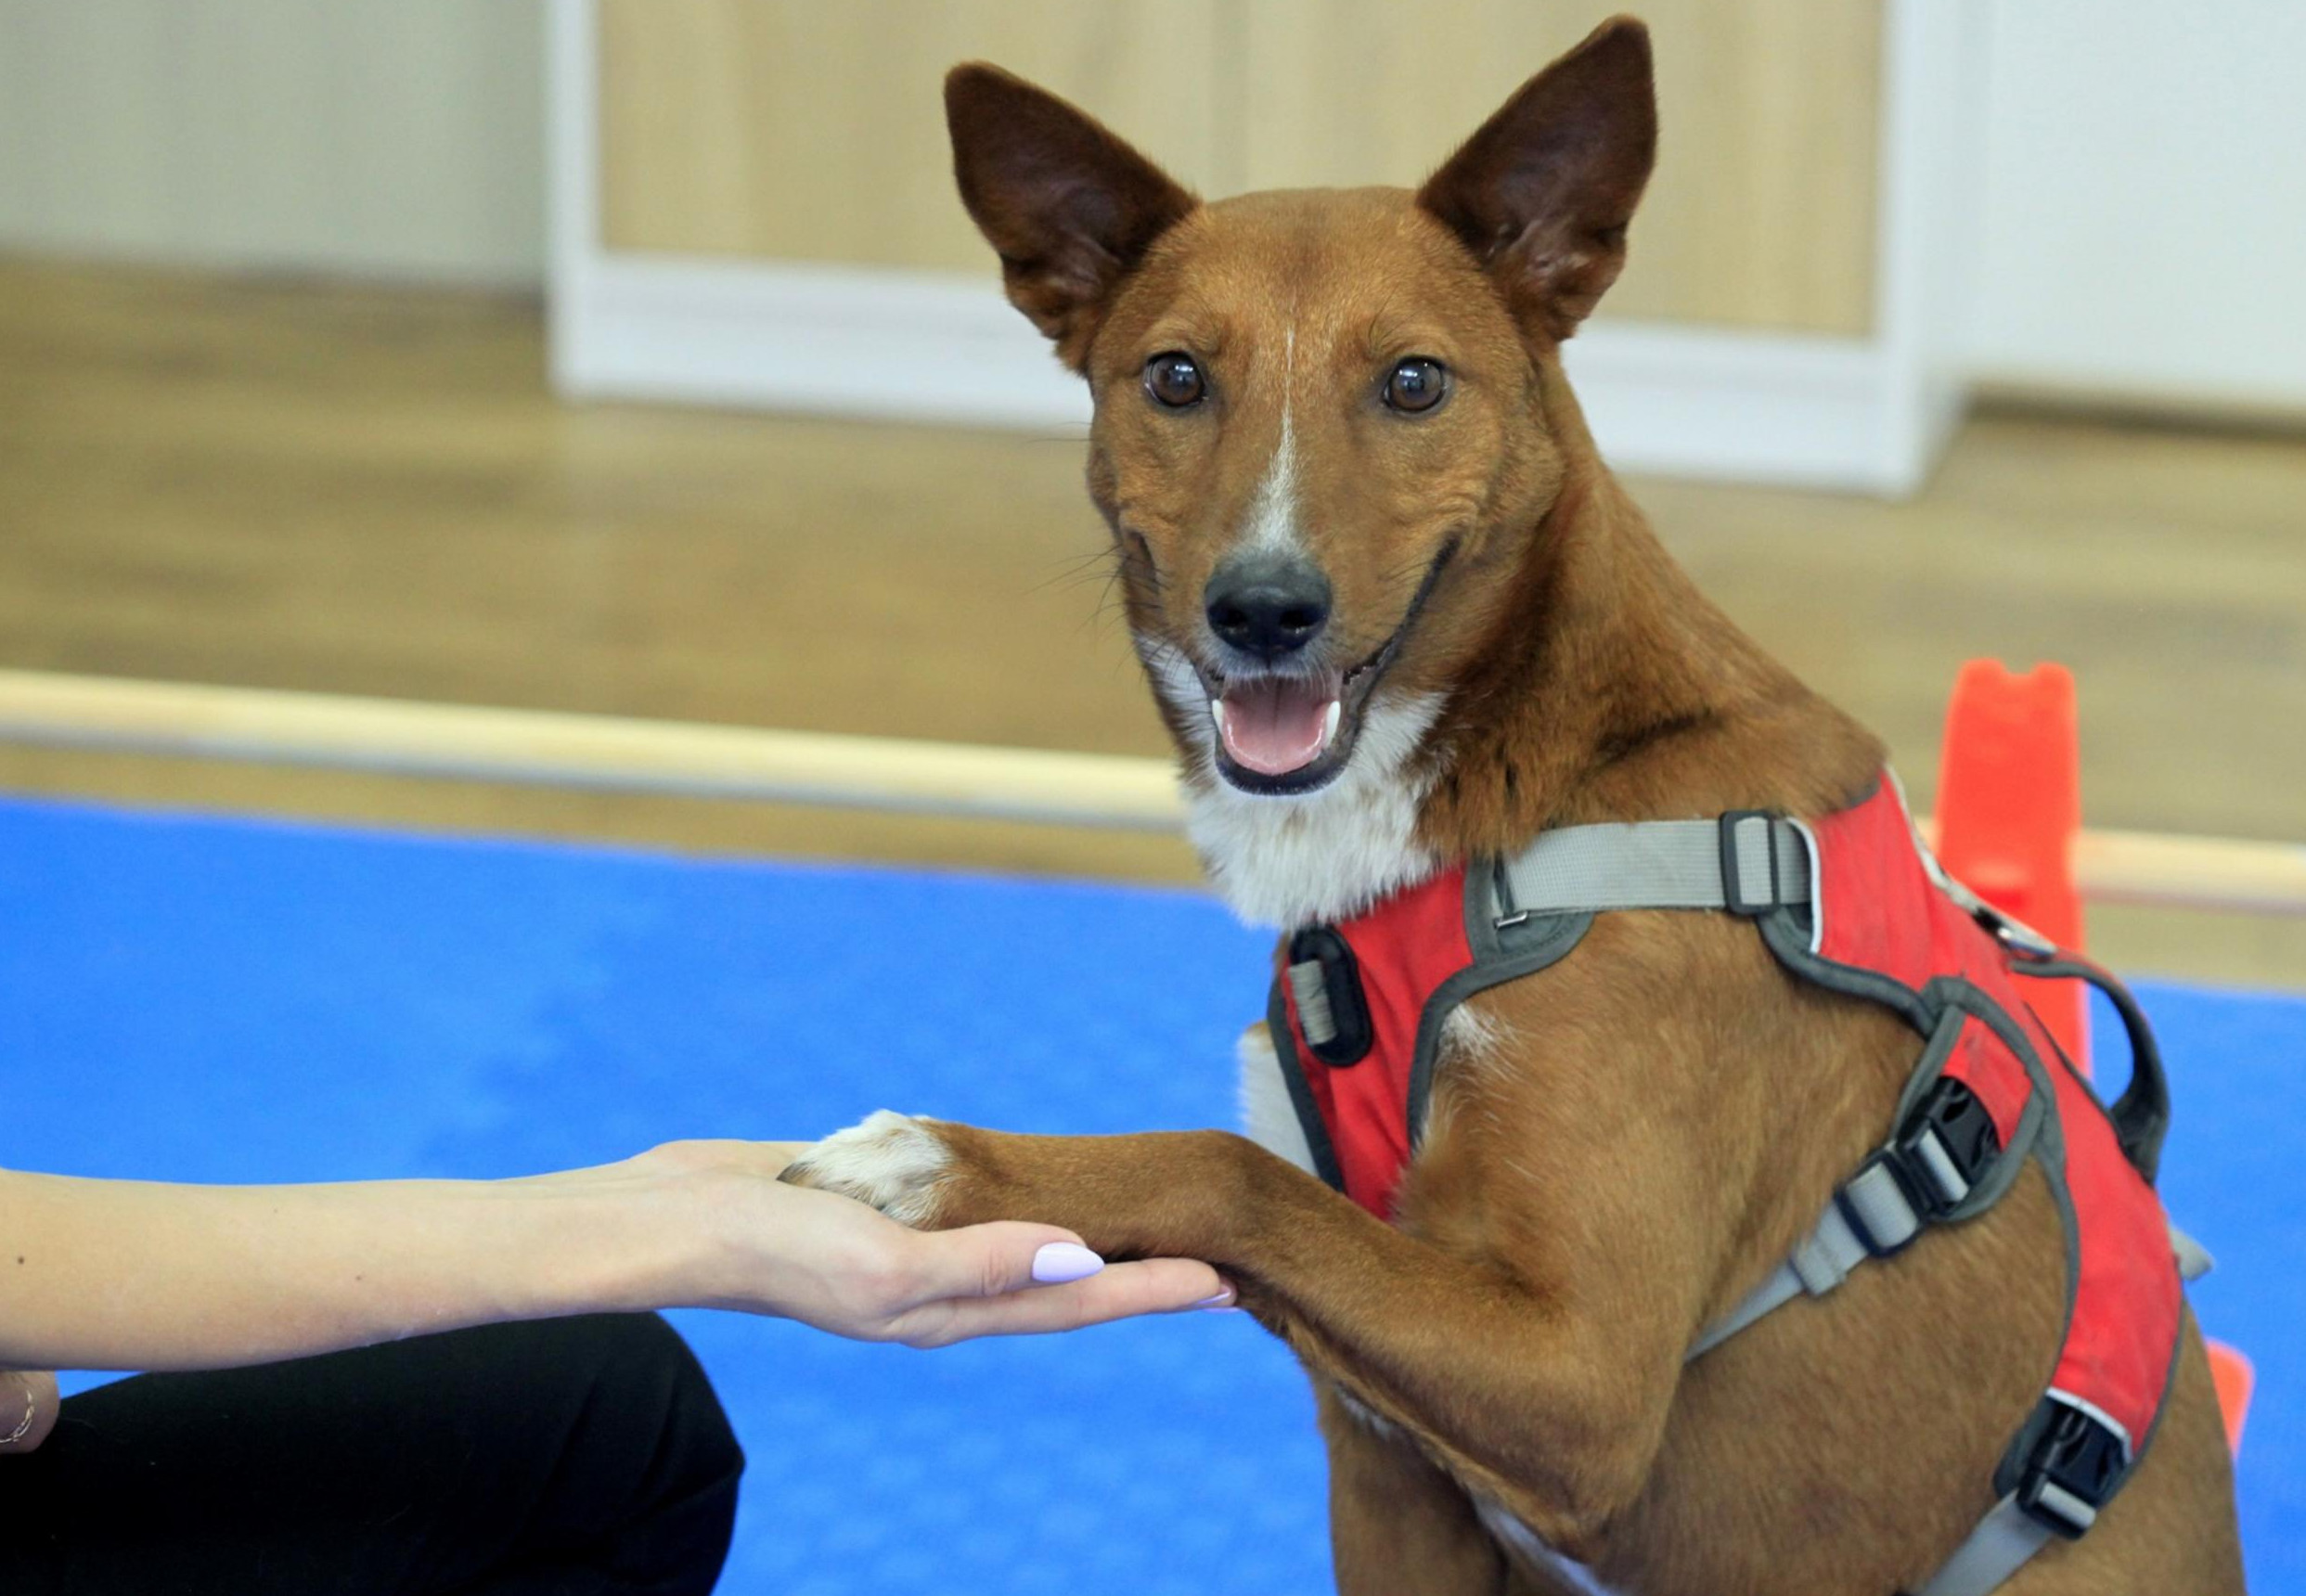 Clicker training for Pets - FOUR PAWS International - Animal